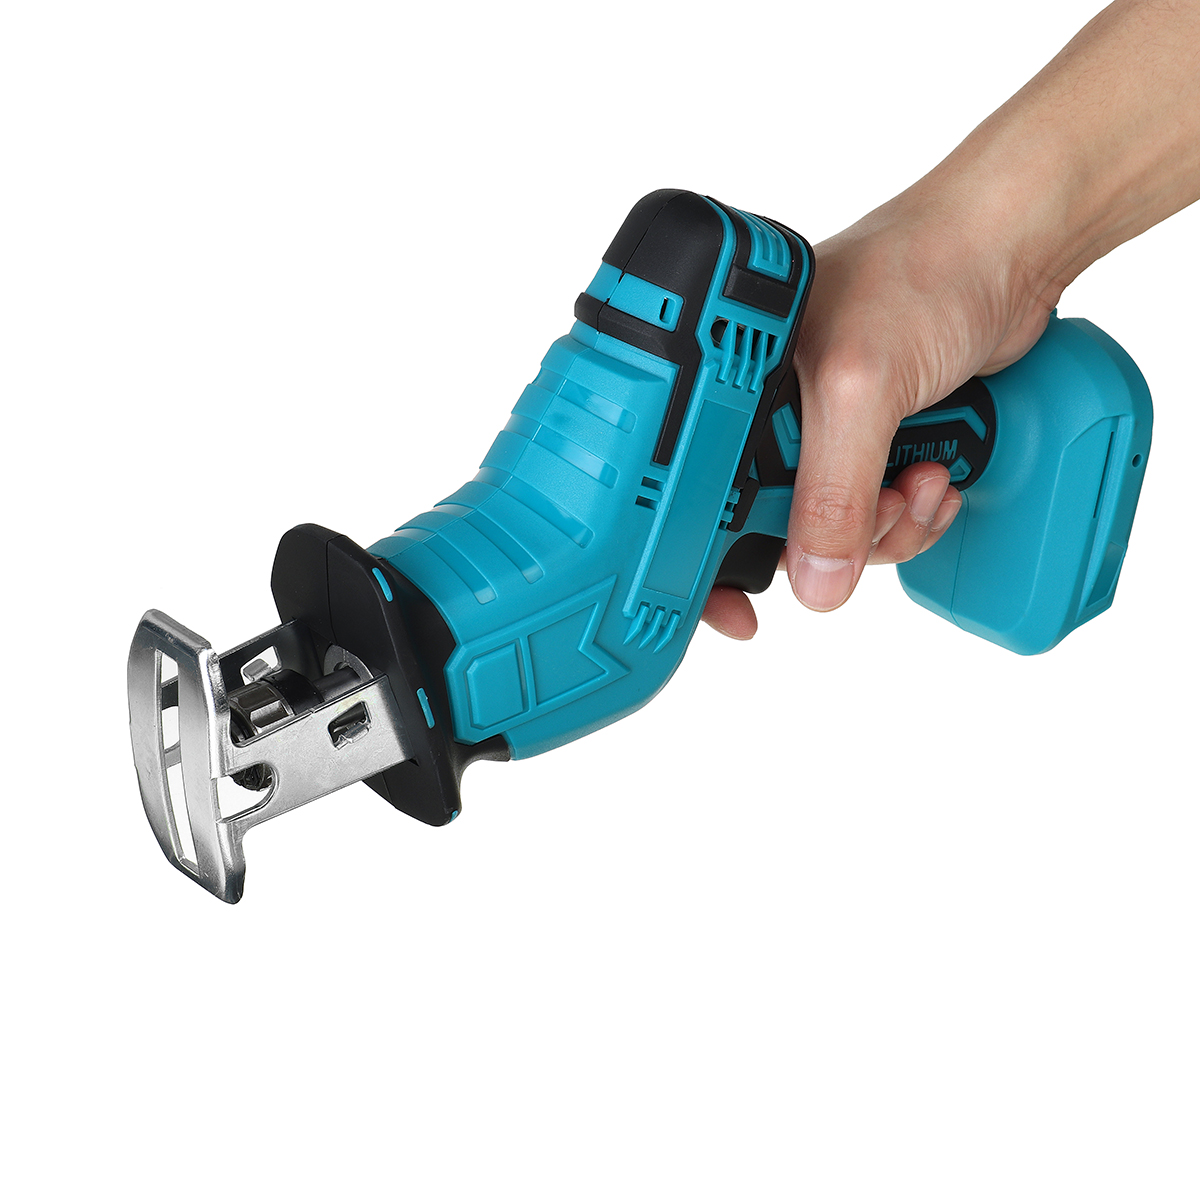 Cordless-Reciprocating-Saw-Portable-Electric-Saw-Wood-Cutting-Tool-For-Makita-18V-Battery-1786908-6